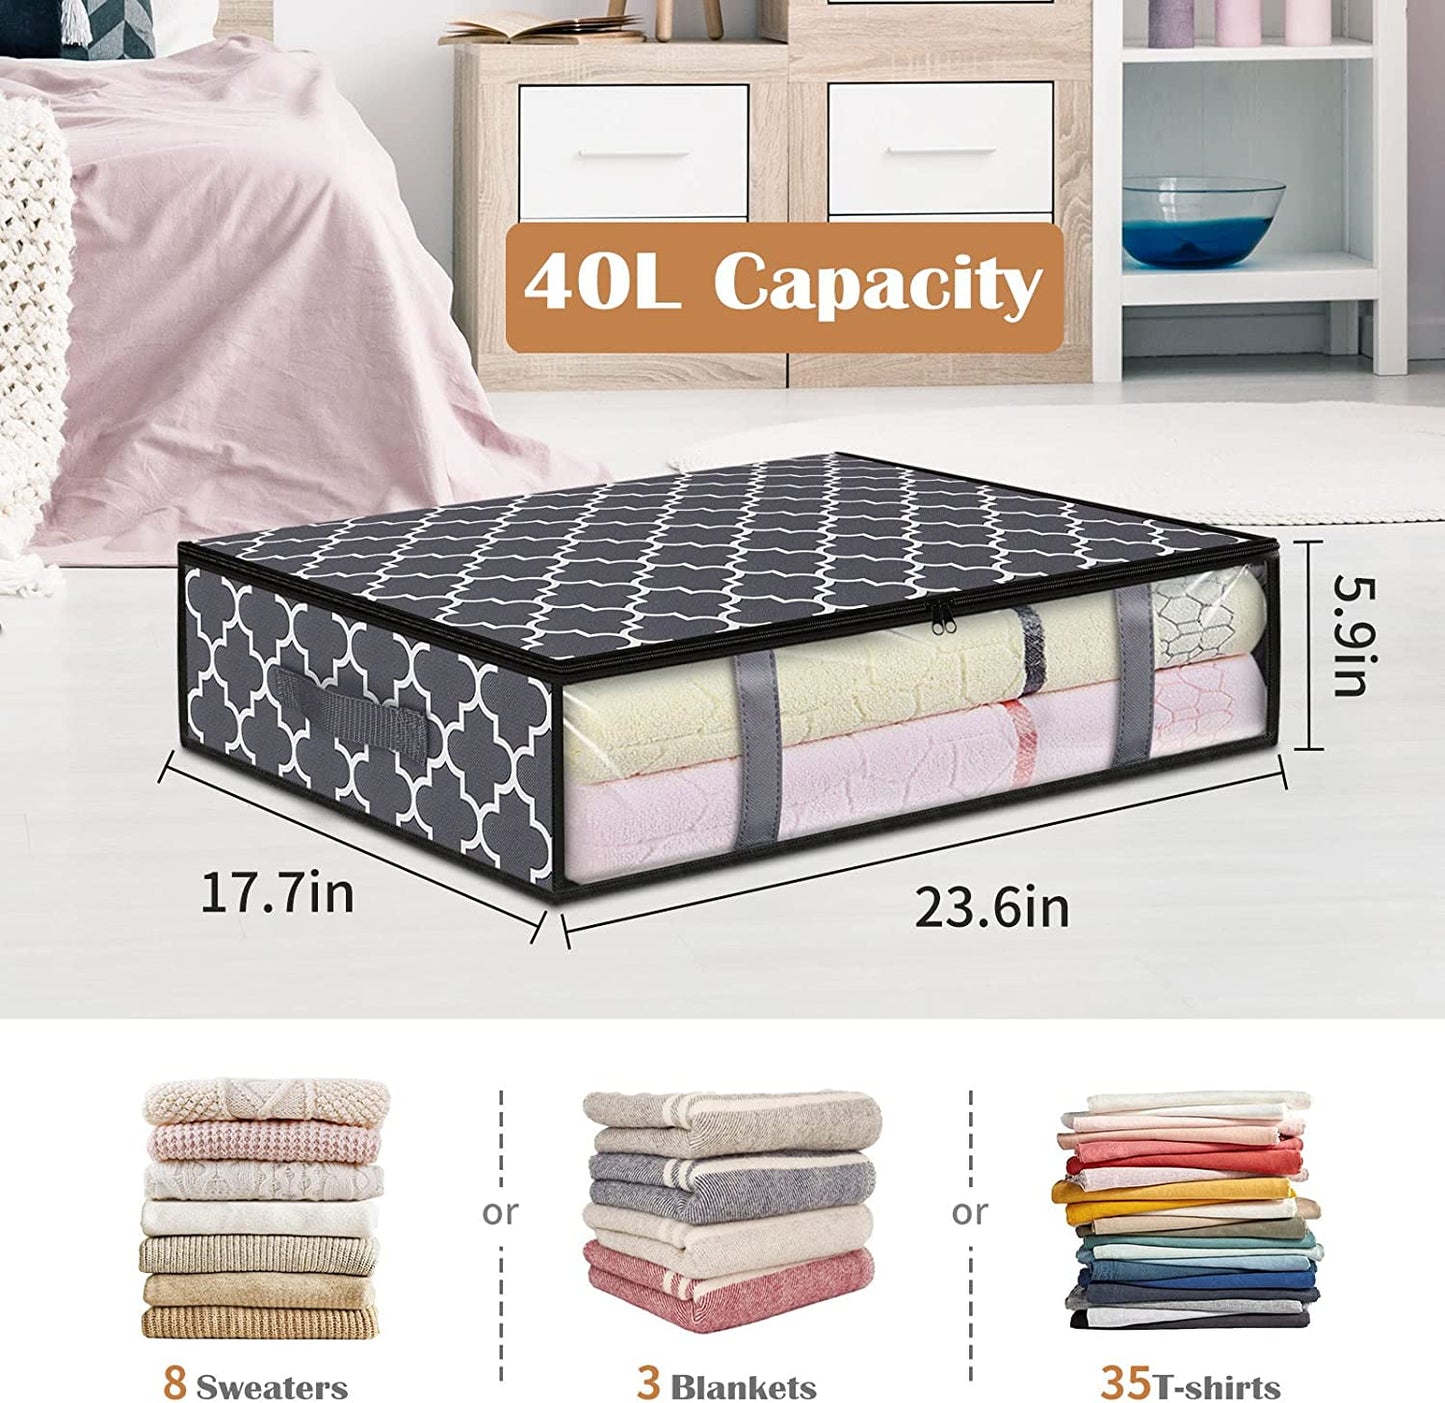 Storage Bins, under Bed Storage Containers, Foldable Clothes Storage Box, Storage Organizer, with Handles, for Comforter, Blanket, Clothing, Sweaters, Pillows, Toys